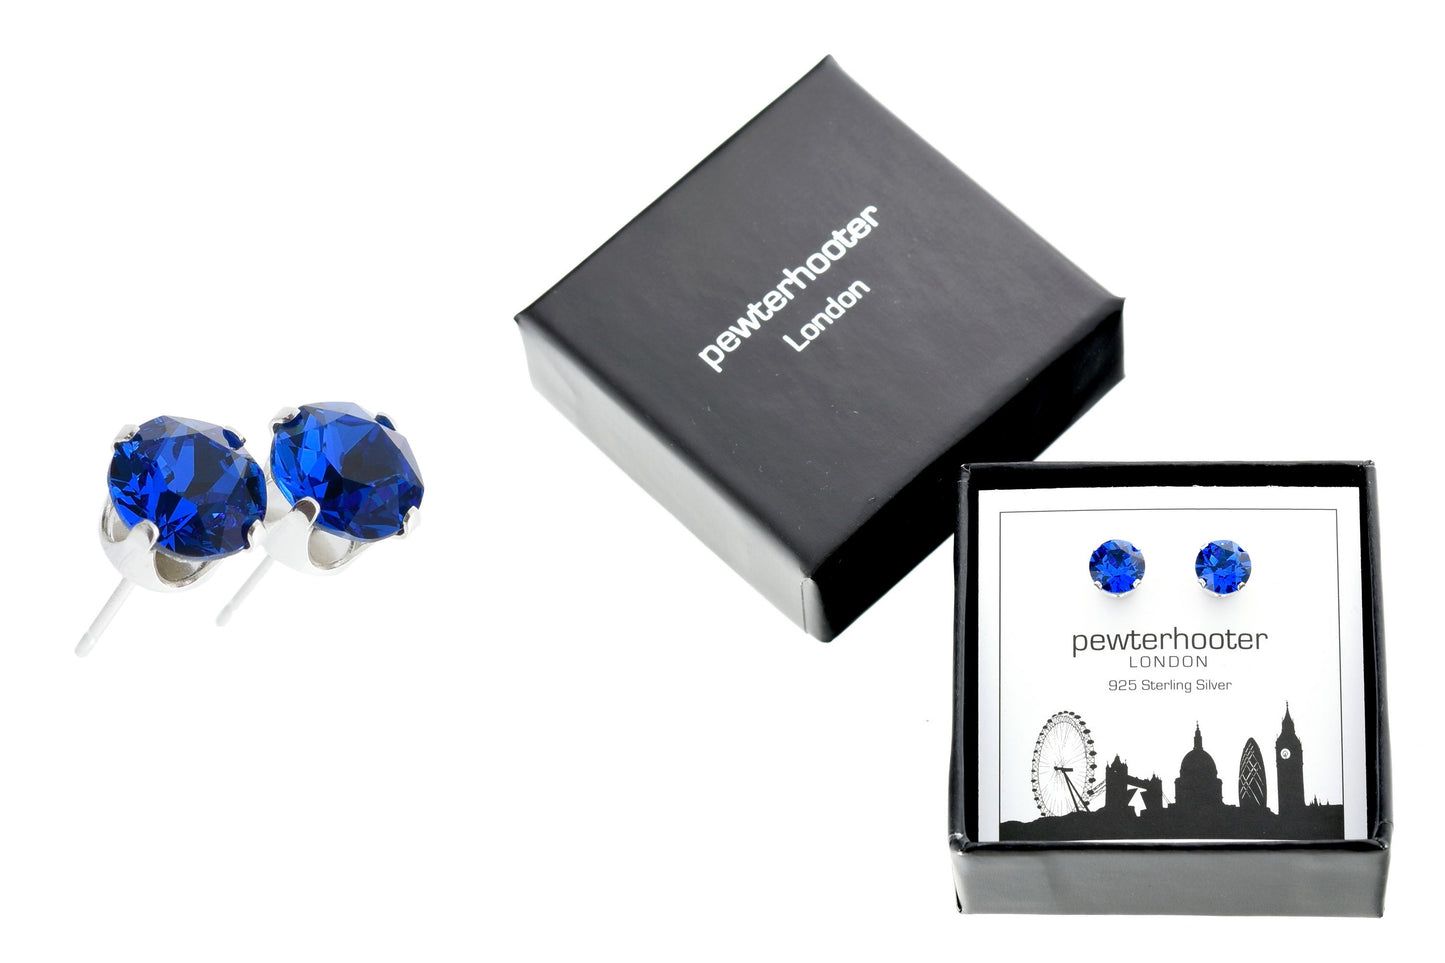 pewterhooter® Women's Classic Collection 925 Sterling silver earrings with sparkling Capri Blue crystals, packaged in a gift box for any occasion.